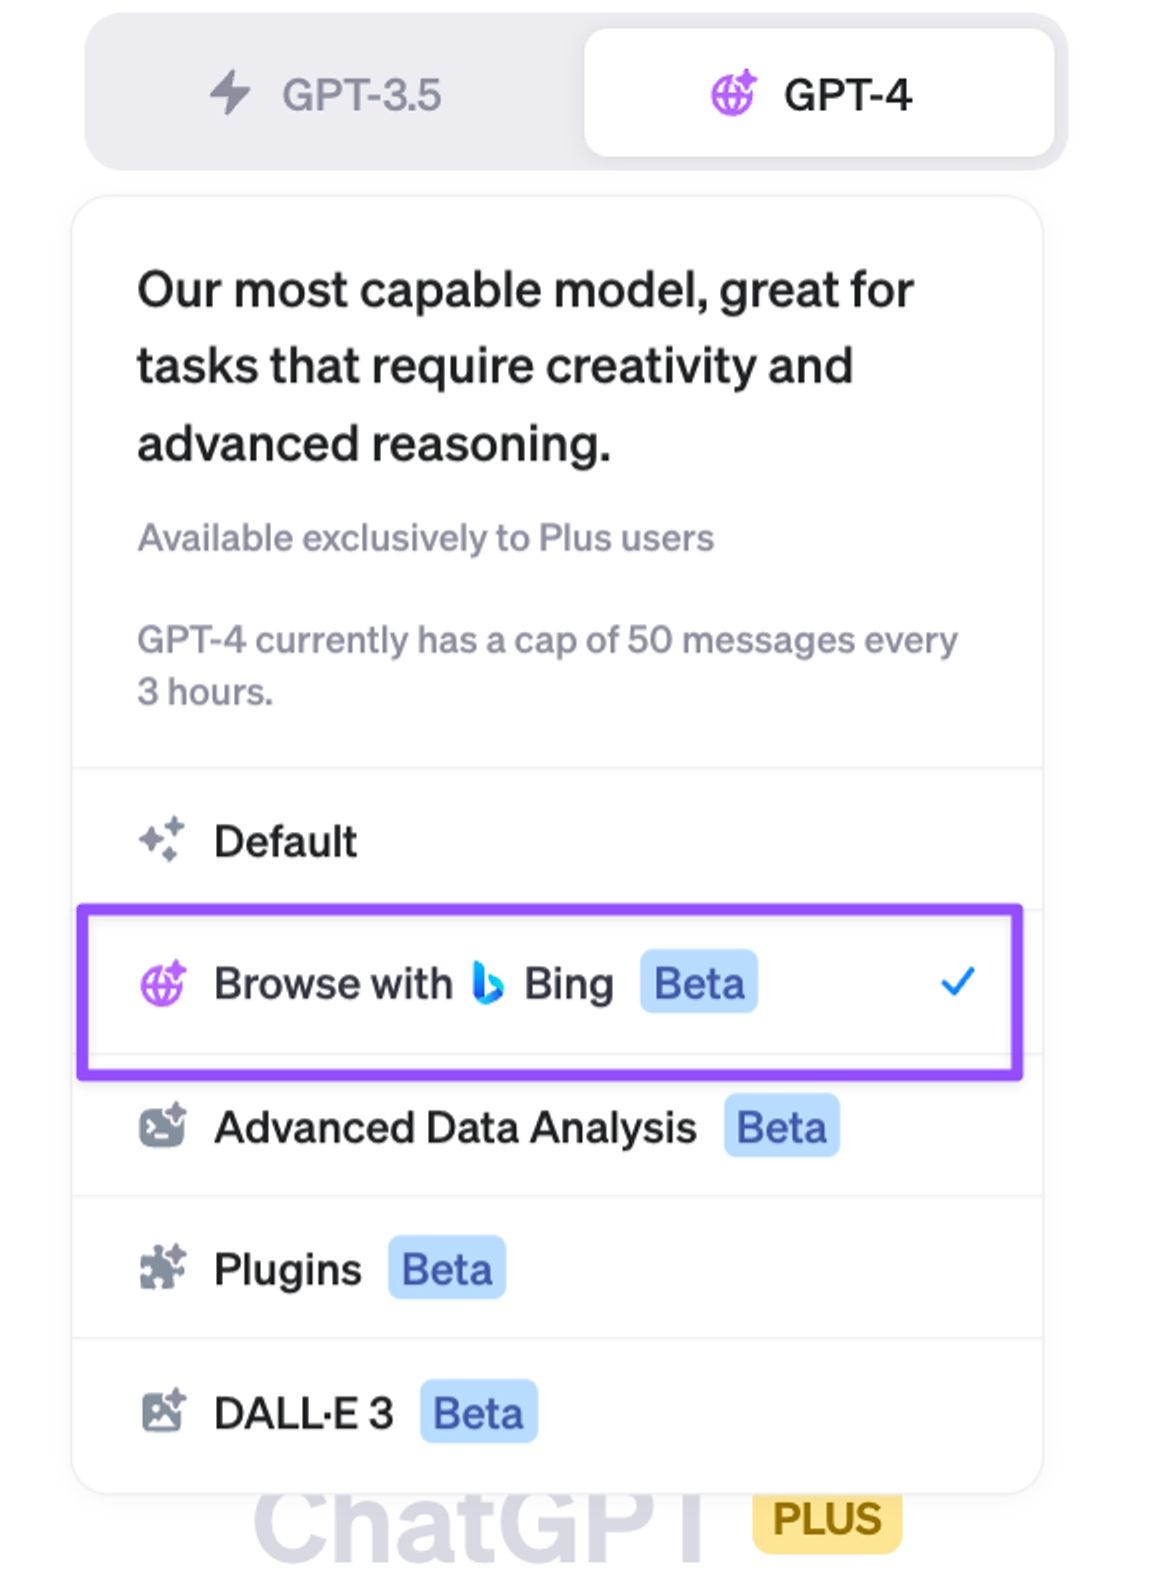 Interface options for ChatGPT platform displaying available model versions and features, including 'Browse with Bing' and 'DALL-E 3' in beta.